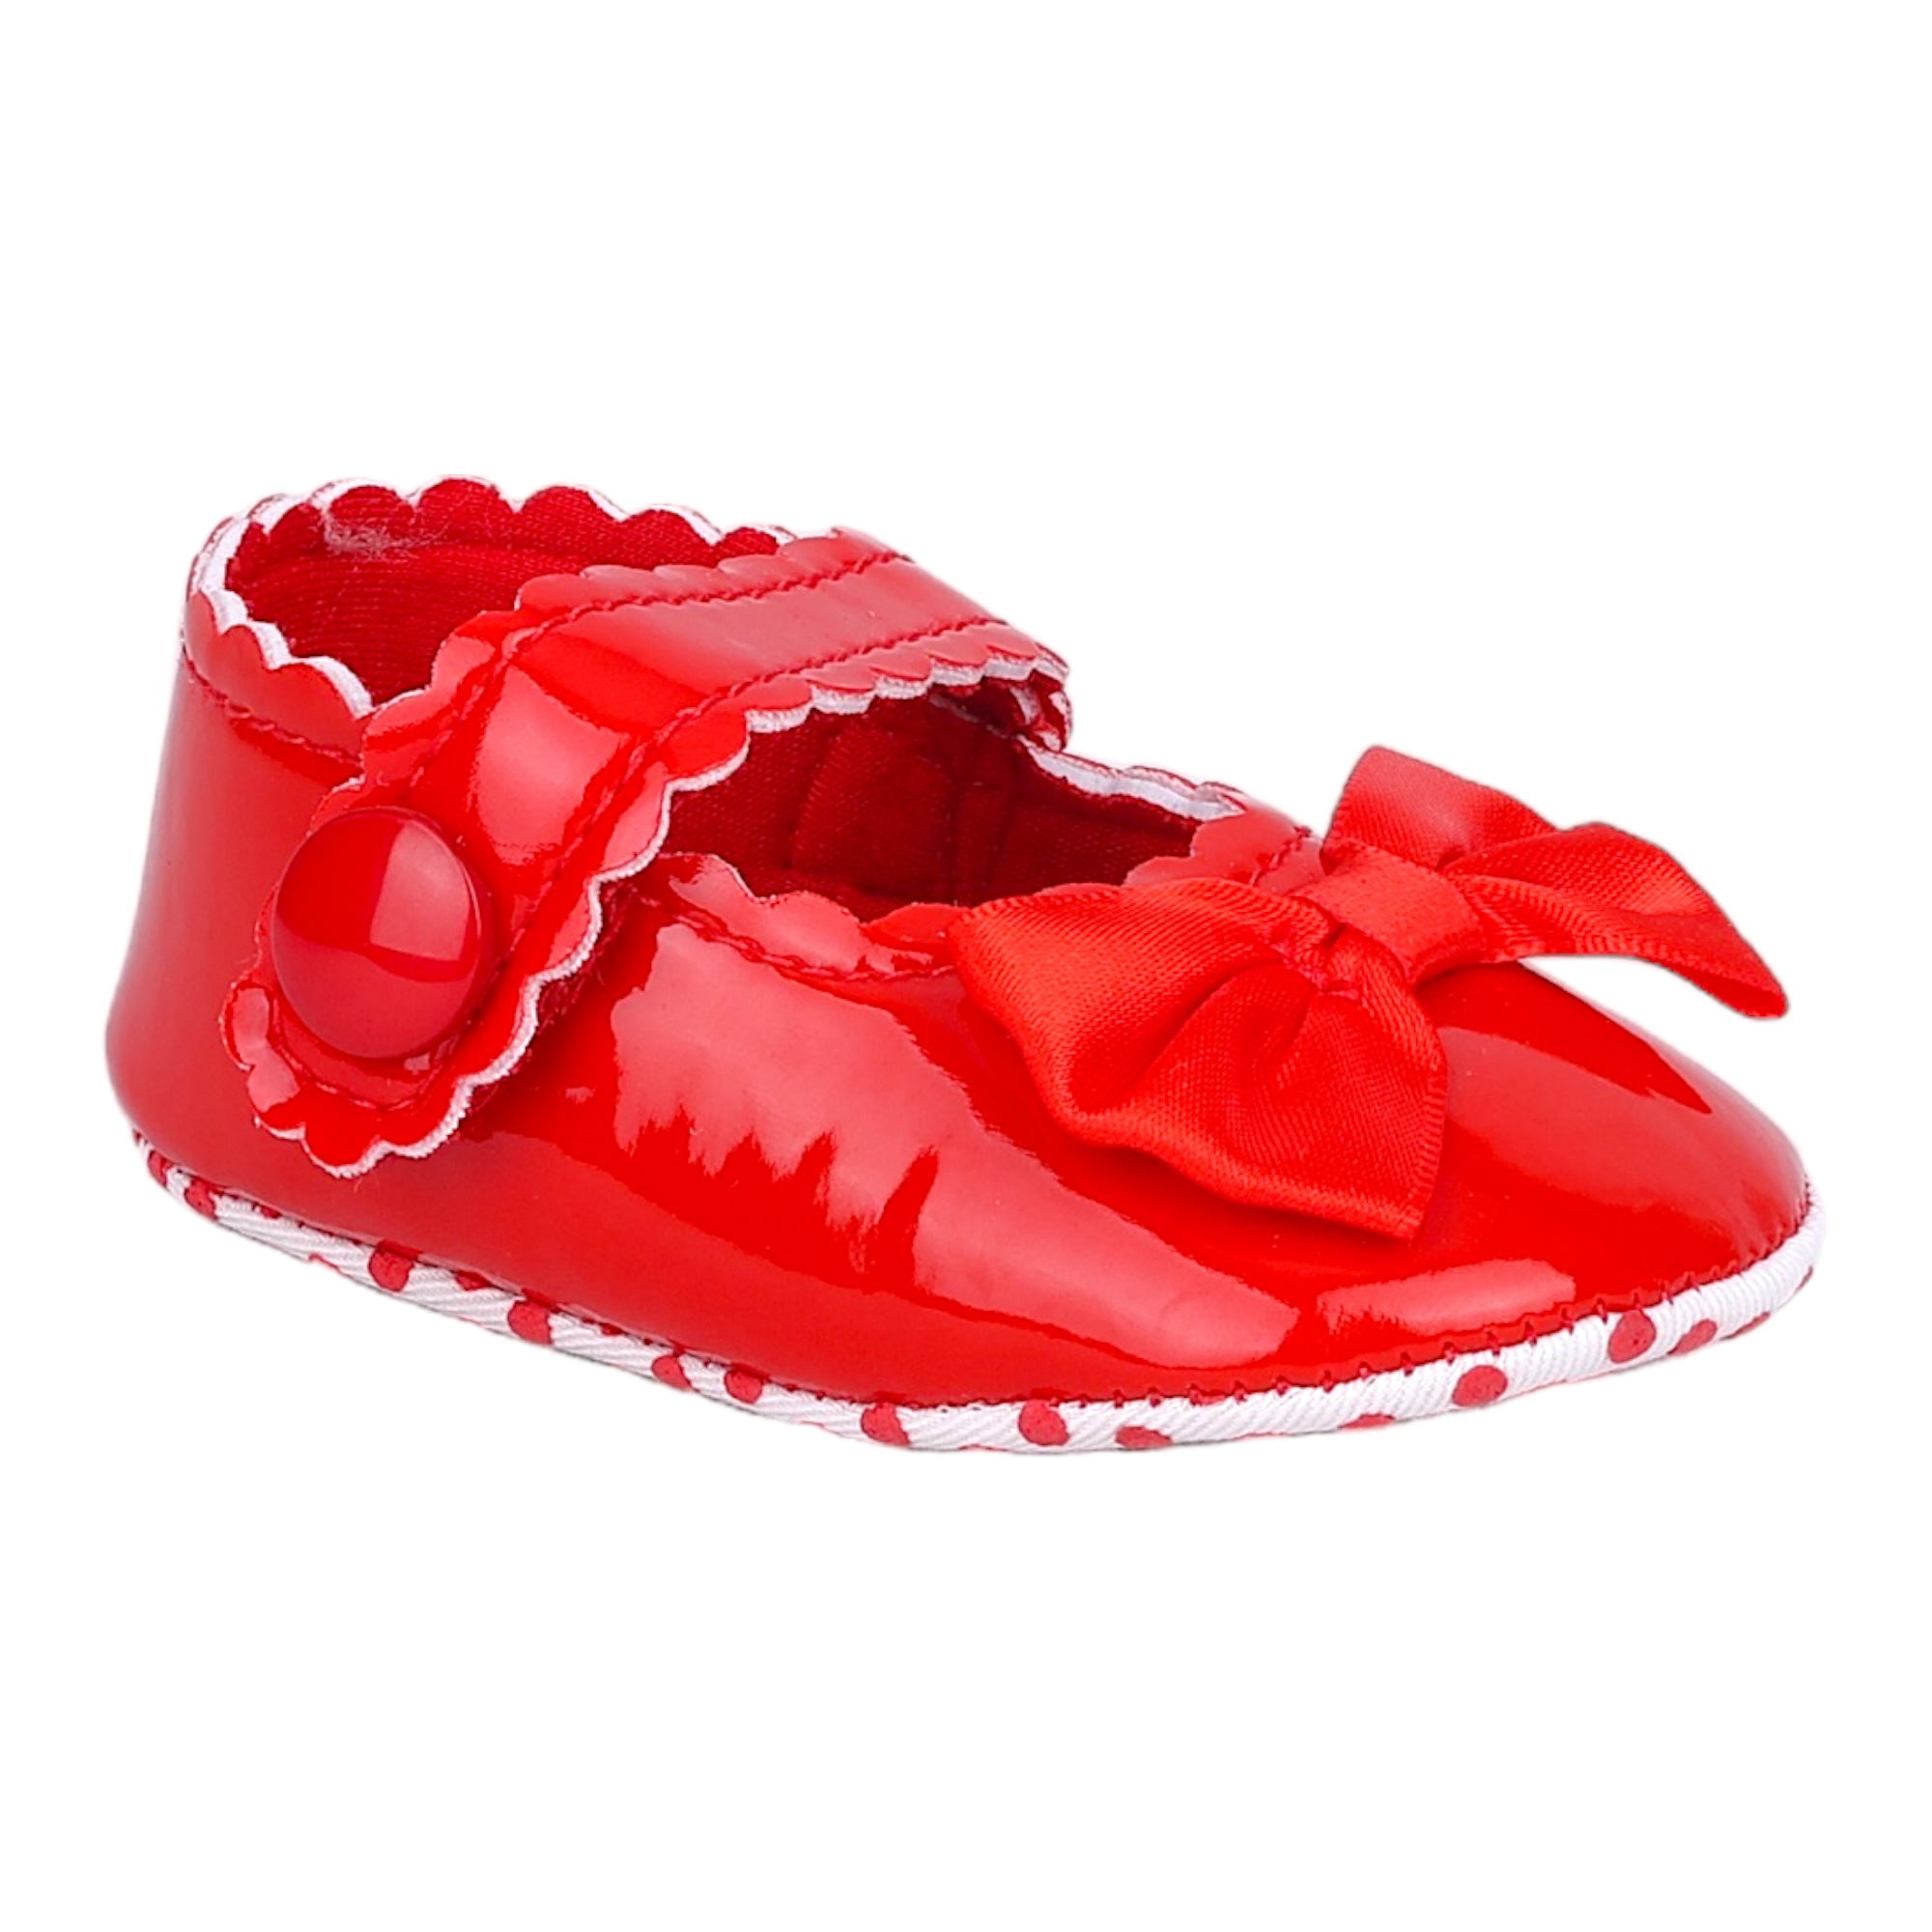 Baby Moo Bow Velcro Strap Patent Leather Anti-Skid Ballerina Booties - Red